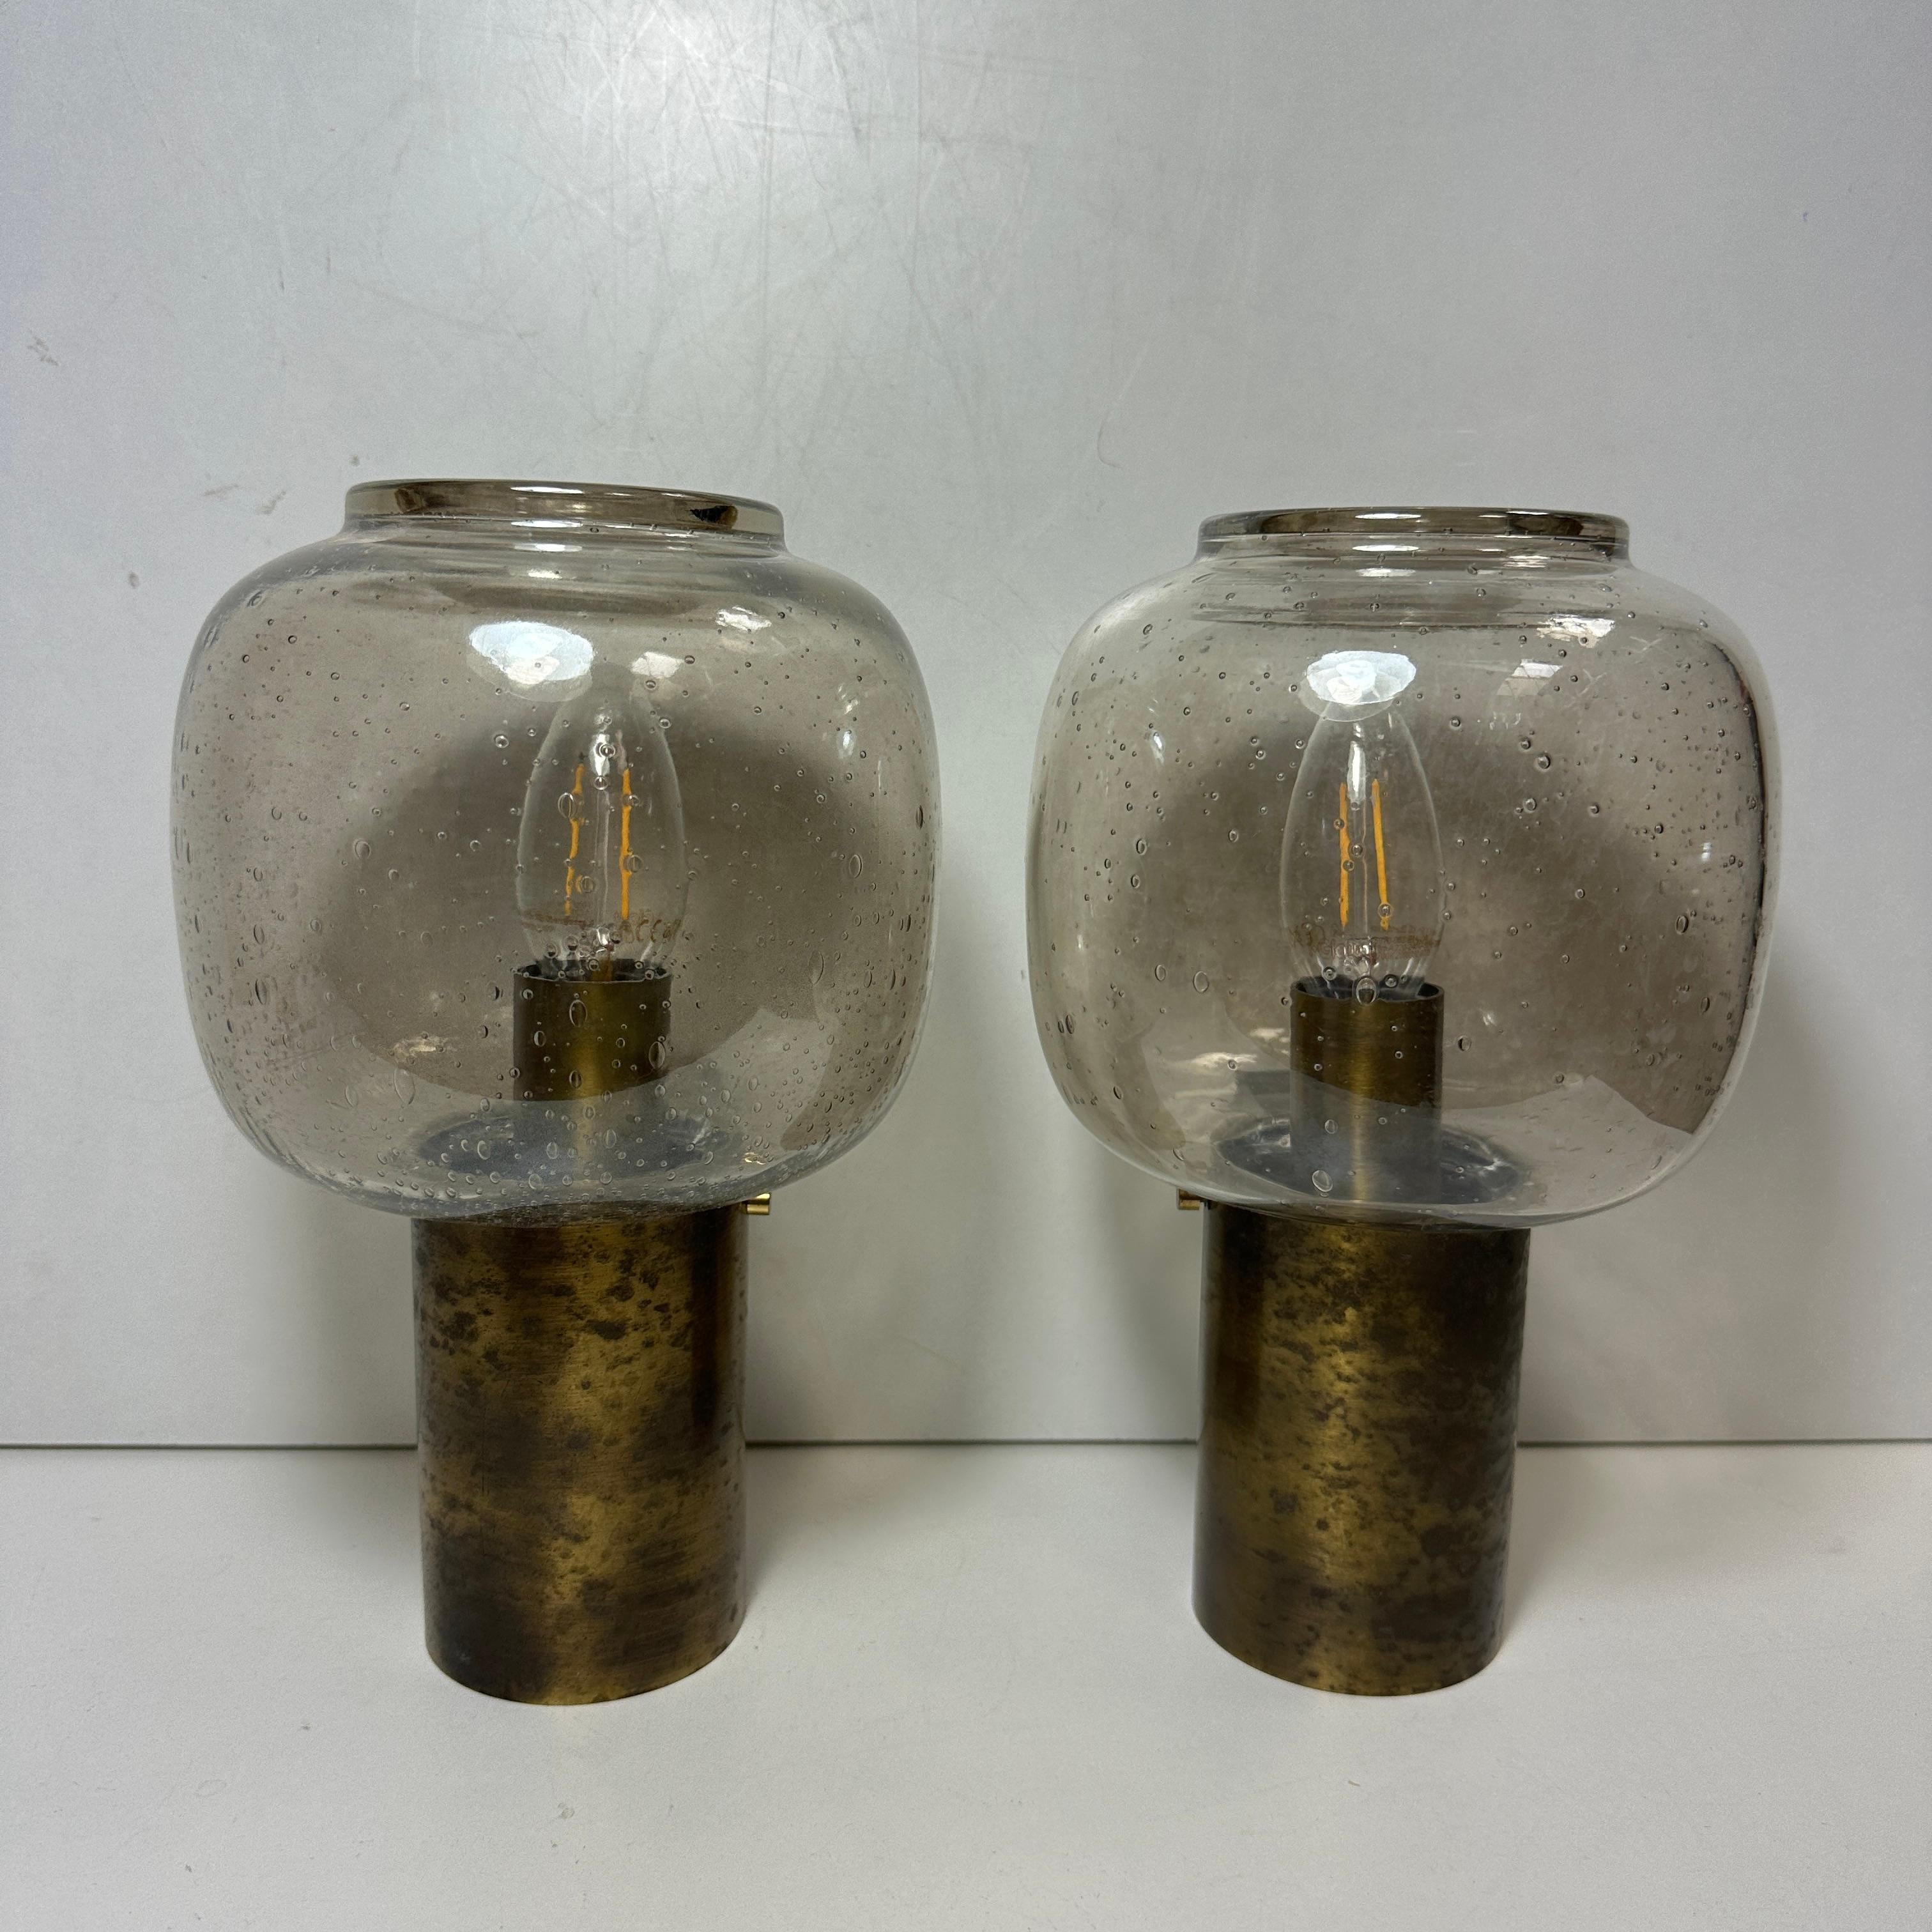 Pair of 1960s Wall Sconces in the Style of Hans - Agne Jakobsson, Skandinavia For Sale 3